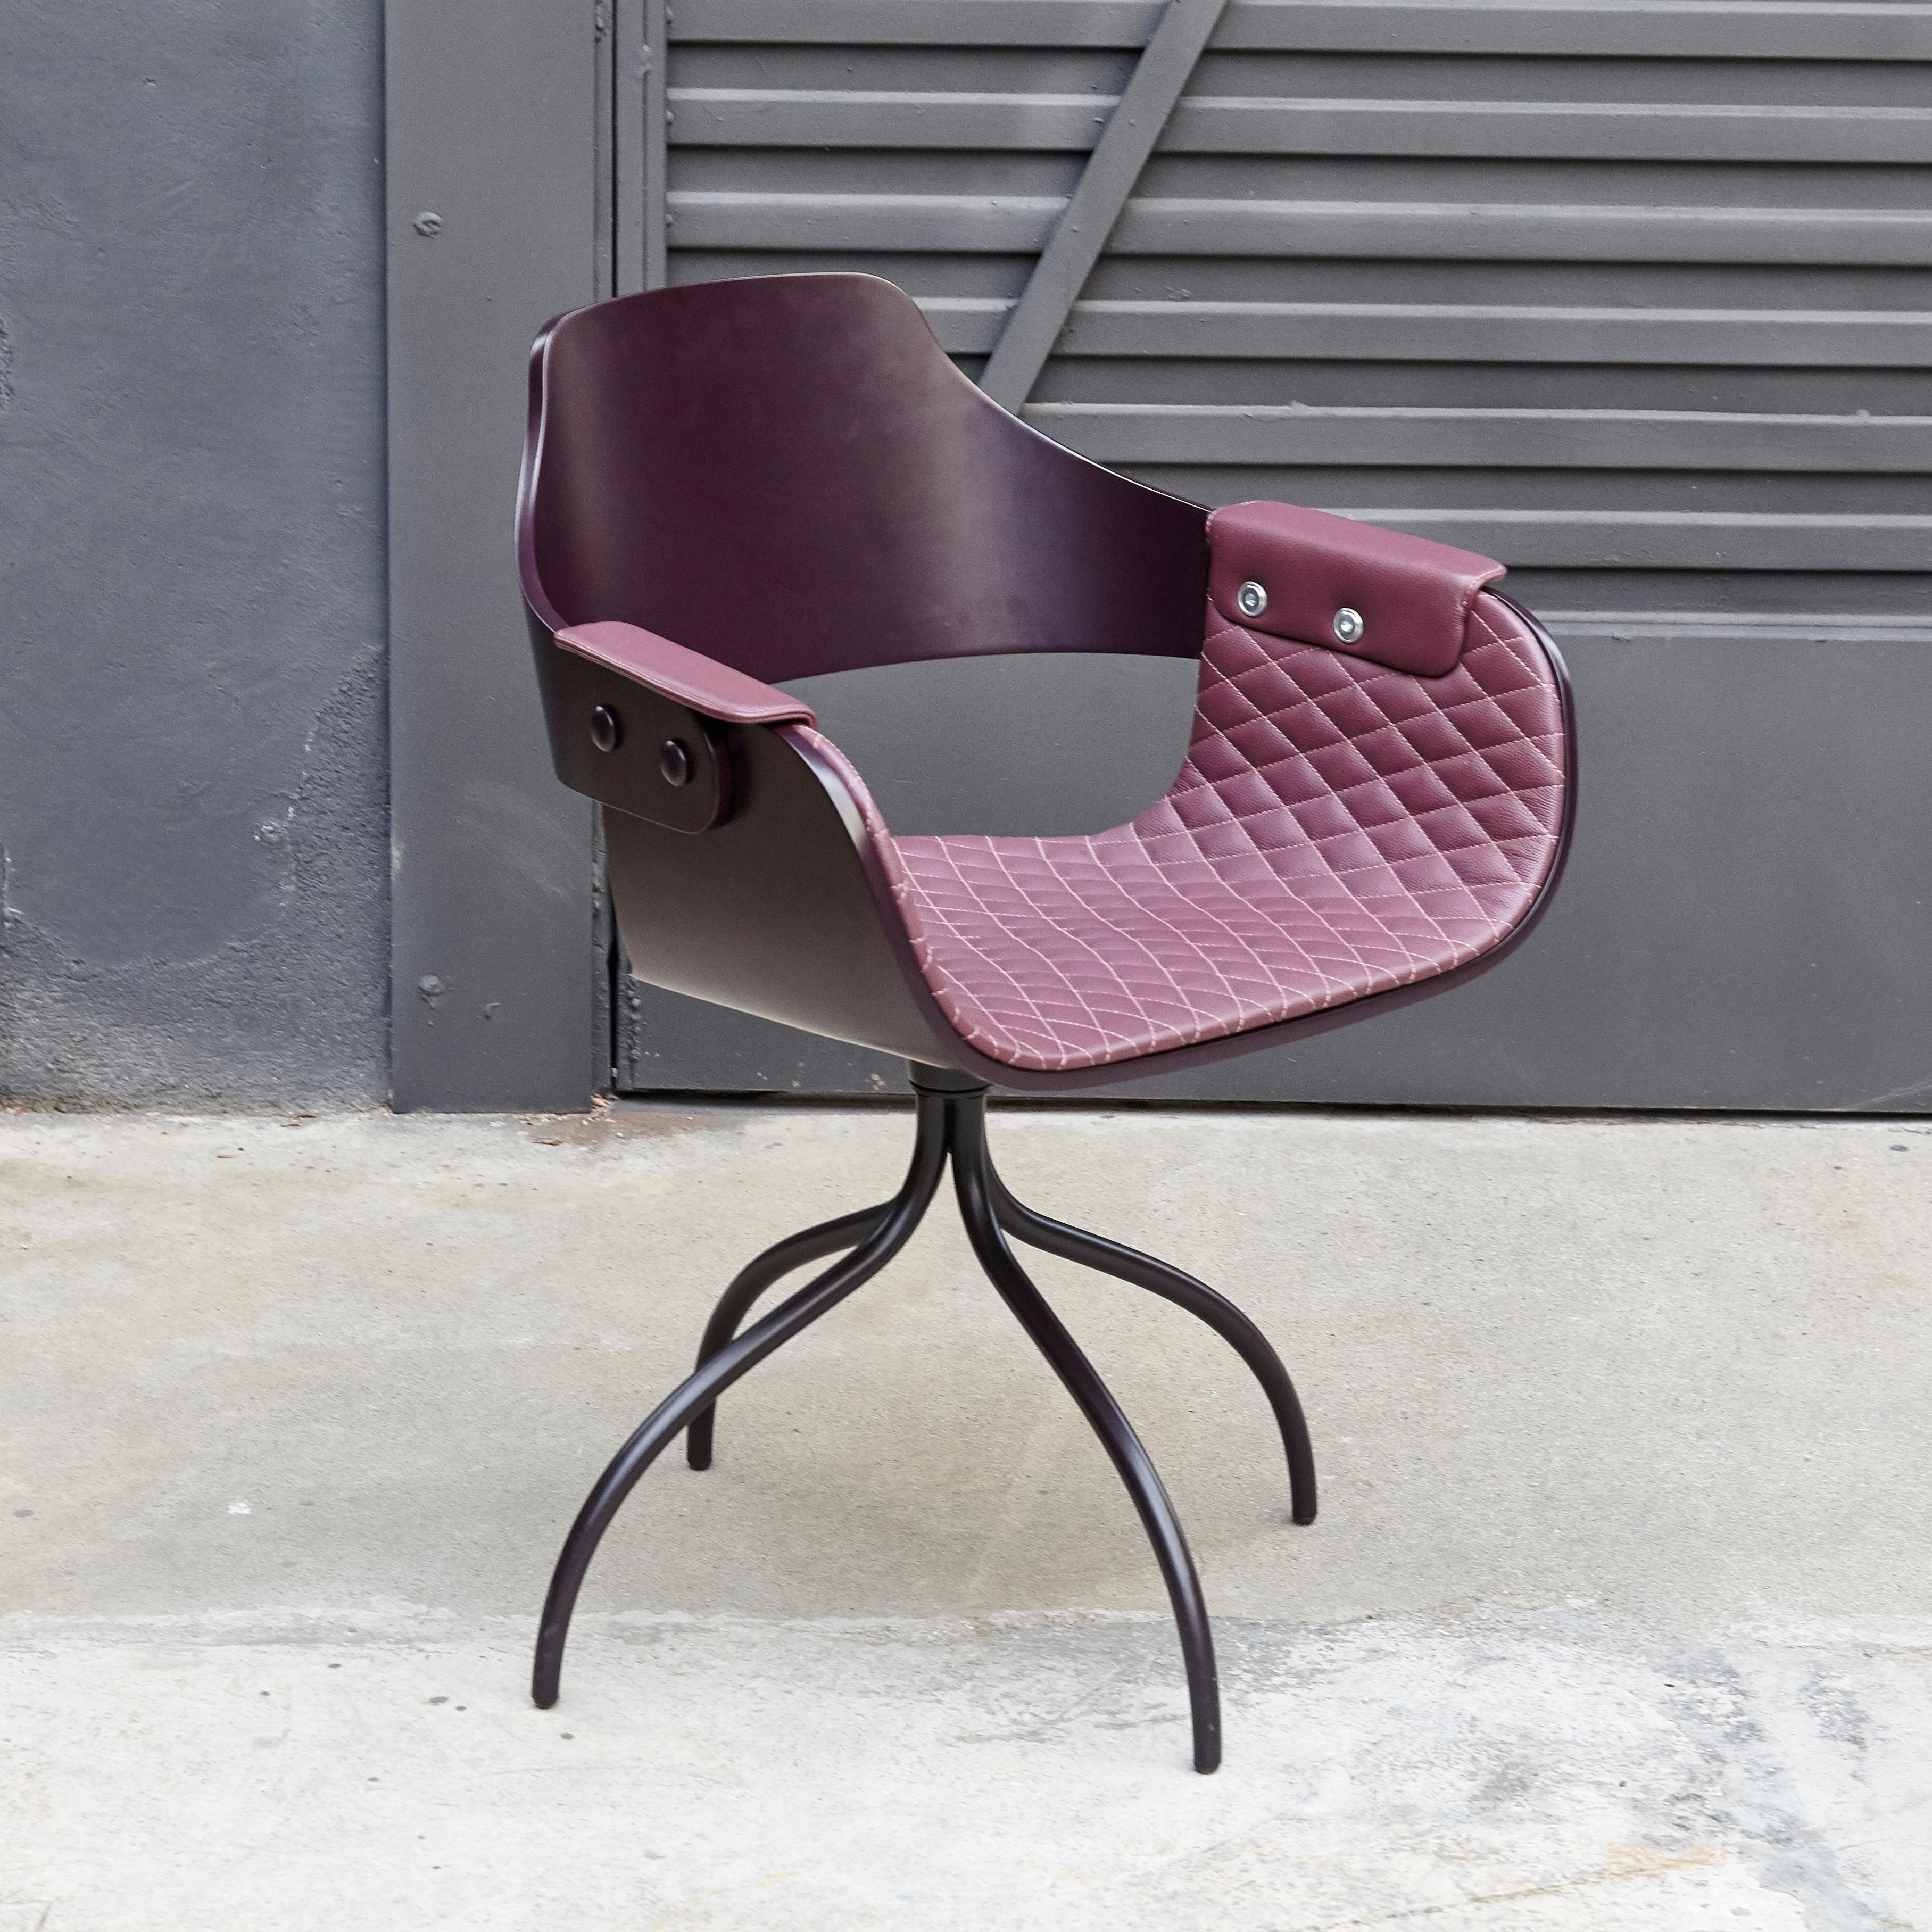 Design by Jaime Hayon, 2007
Manufactured by BD Barcelona.

Wood back and upholstered interior seat with arms cushion.
Measures: 52 x 55 x H.79 cm.

Painted metallic tubular steel structure. 
Wood back and upholstered interior seat with arms